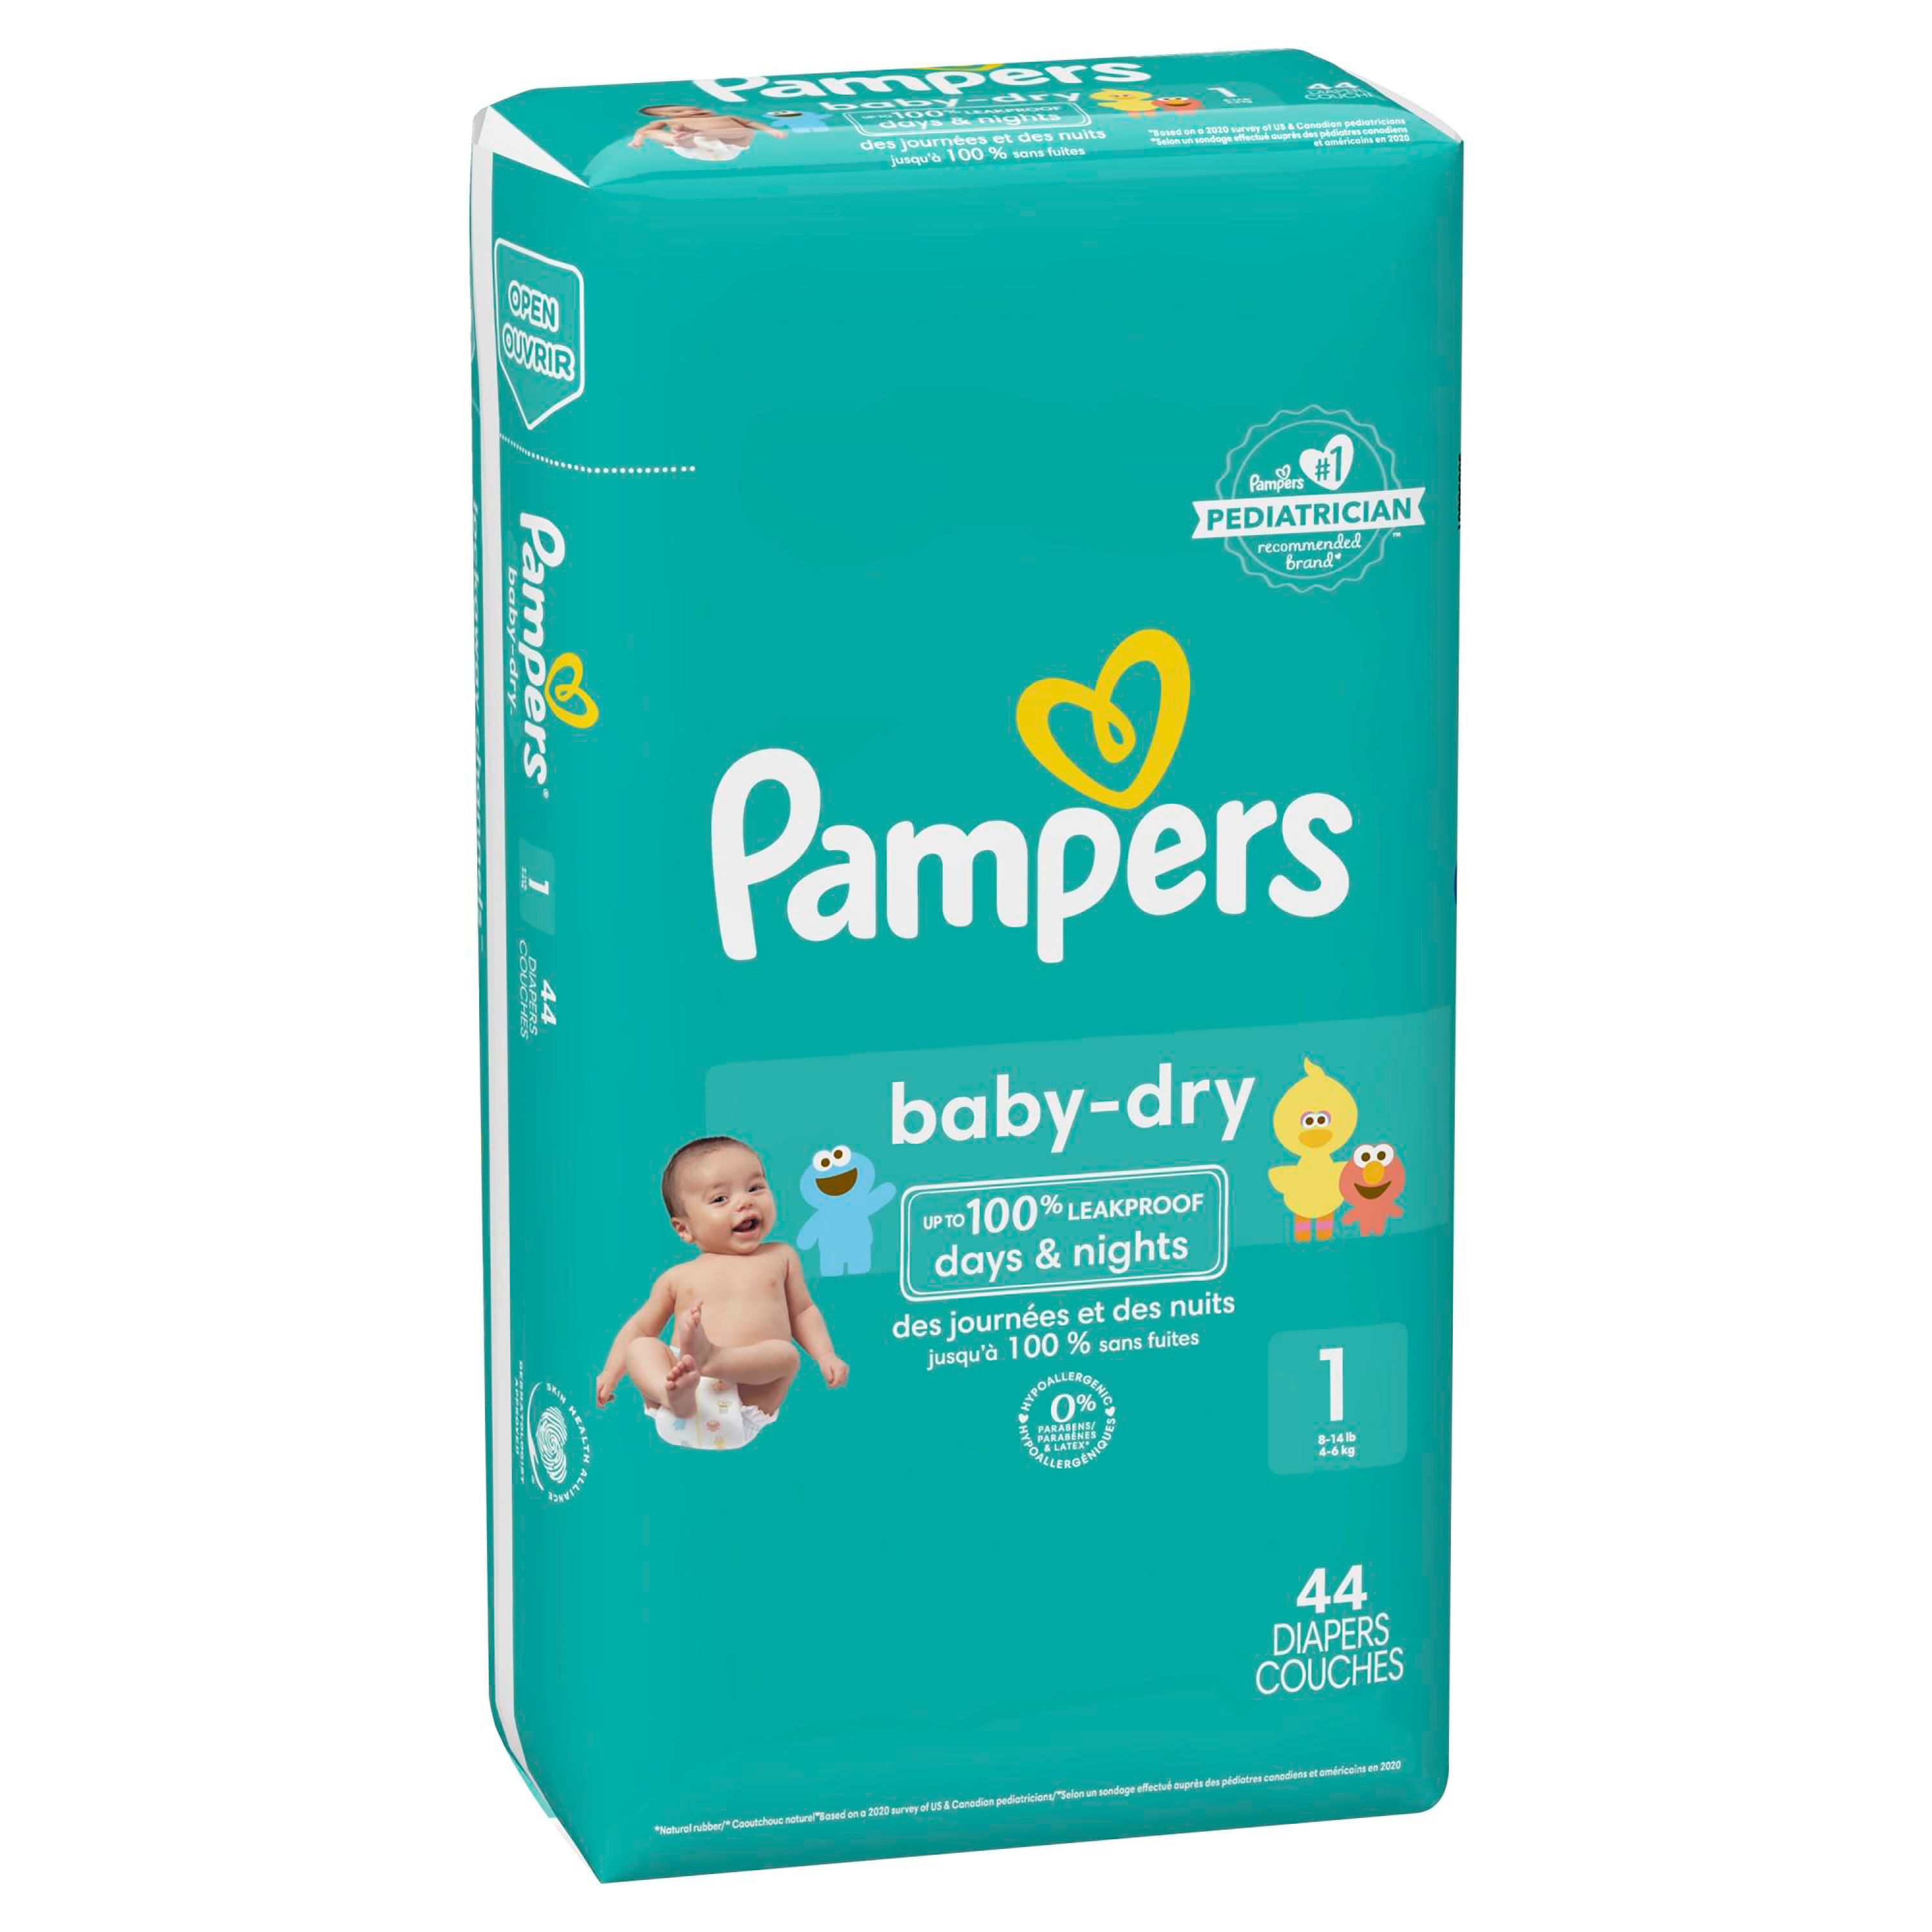 Pampers Baby-Dry - Pañales desechables absorbentes, talla 1, 204 unidades